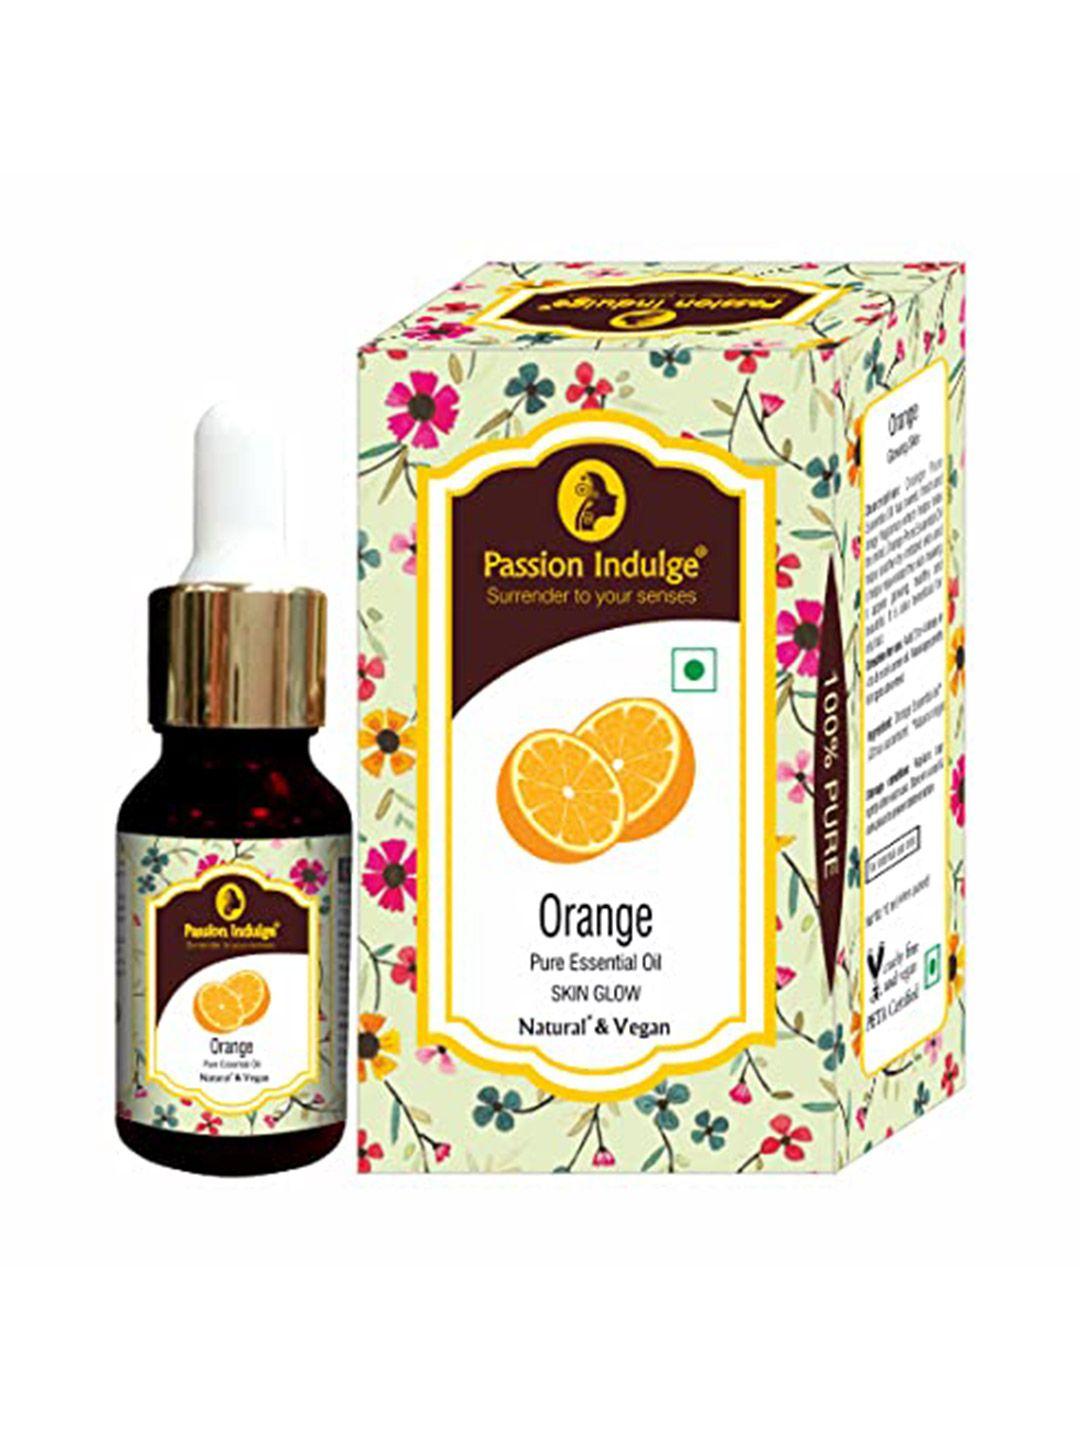 passion indulge orange pure essential oil for glowing skin & anti-aging - 10ml